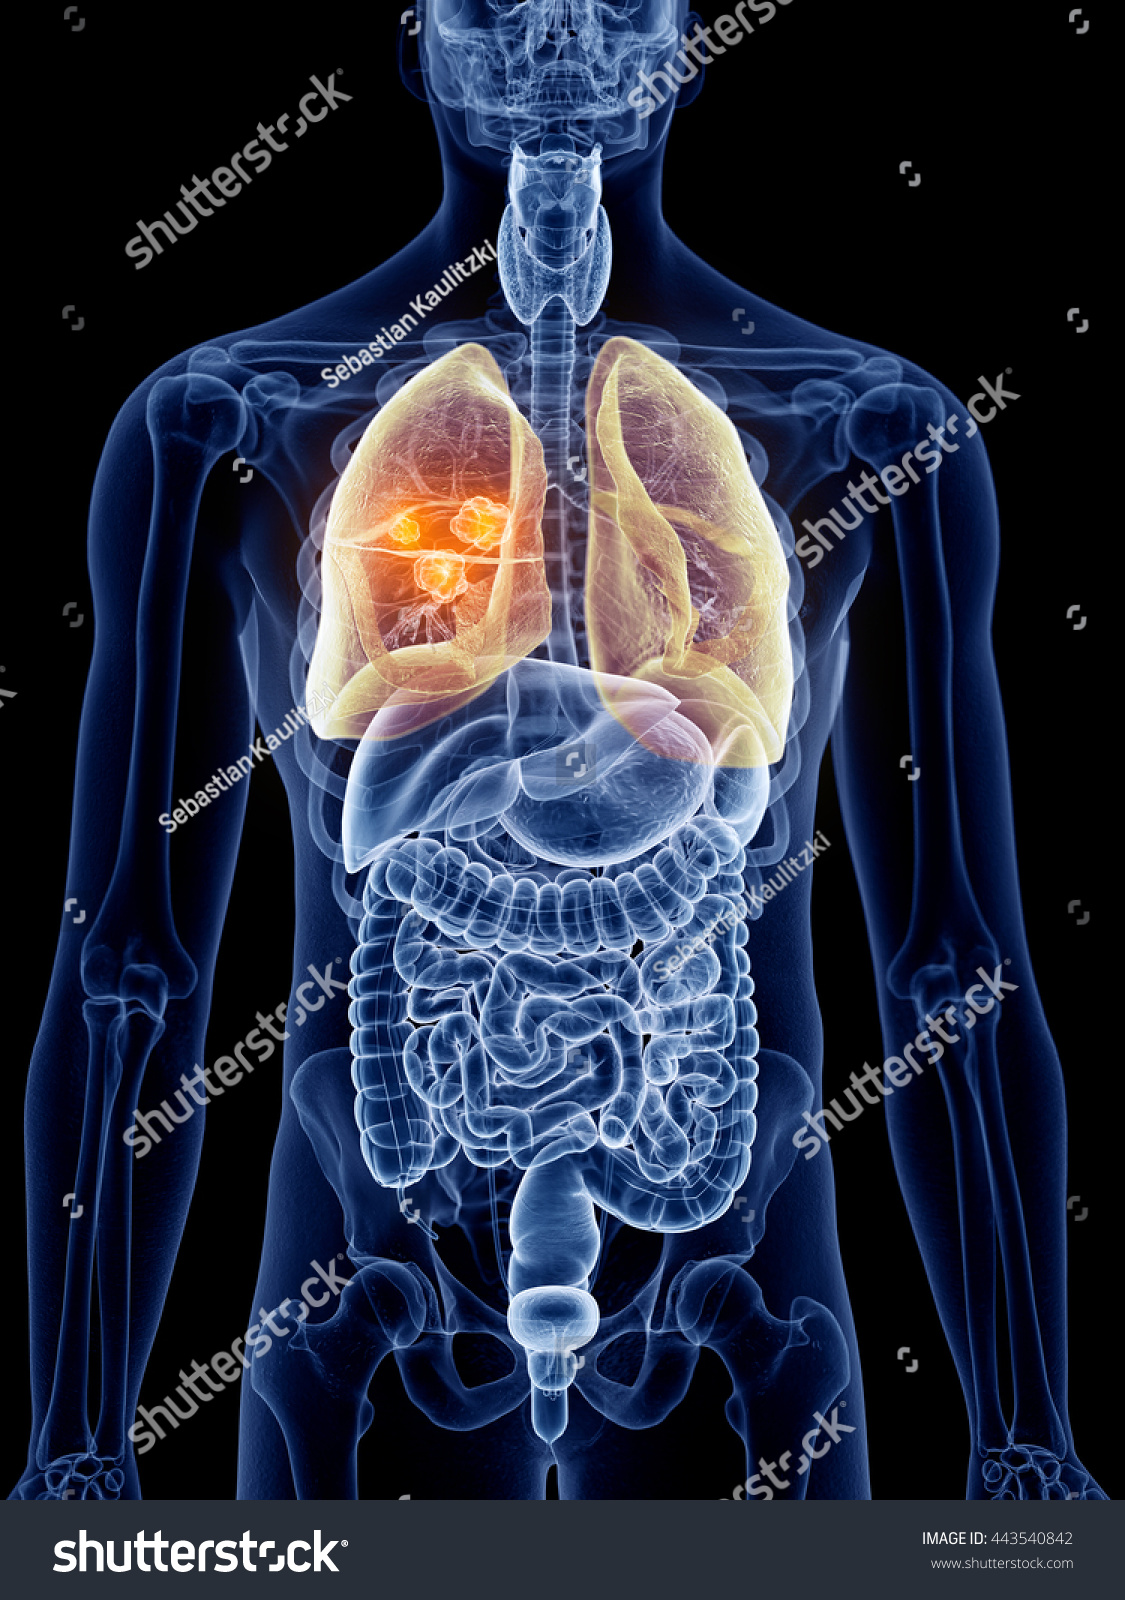 3d Rendered, Medically Accurate Illustration Of Lung Cancer - 443540842 ...